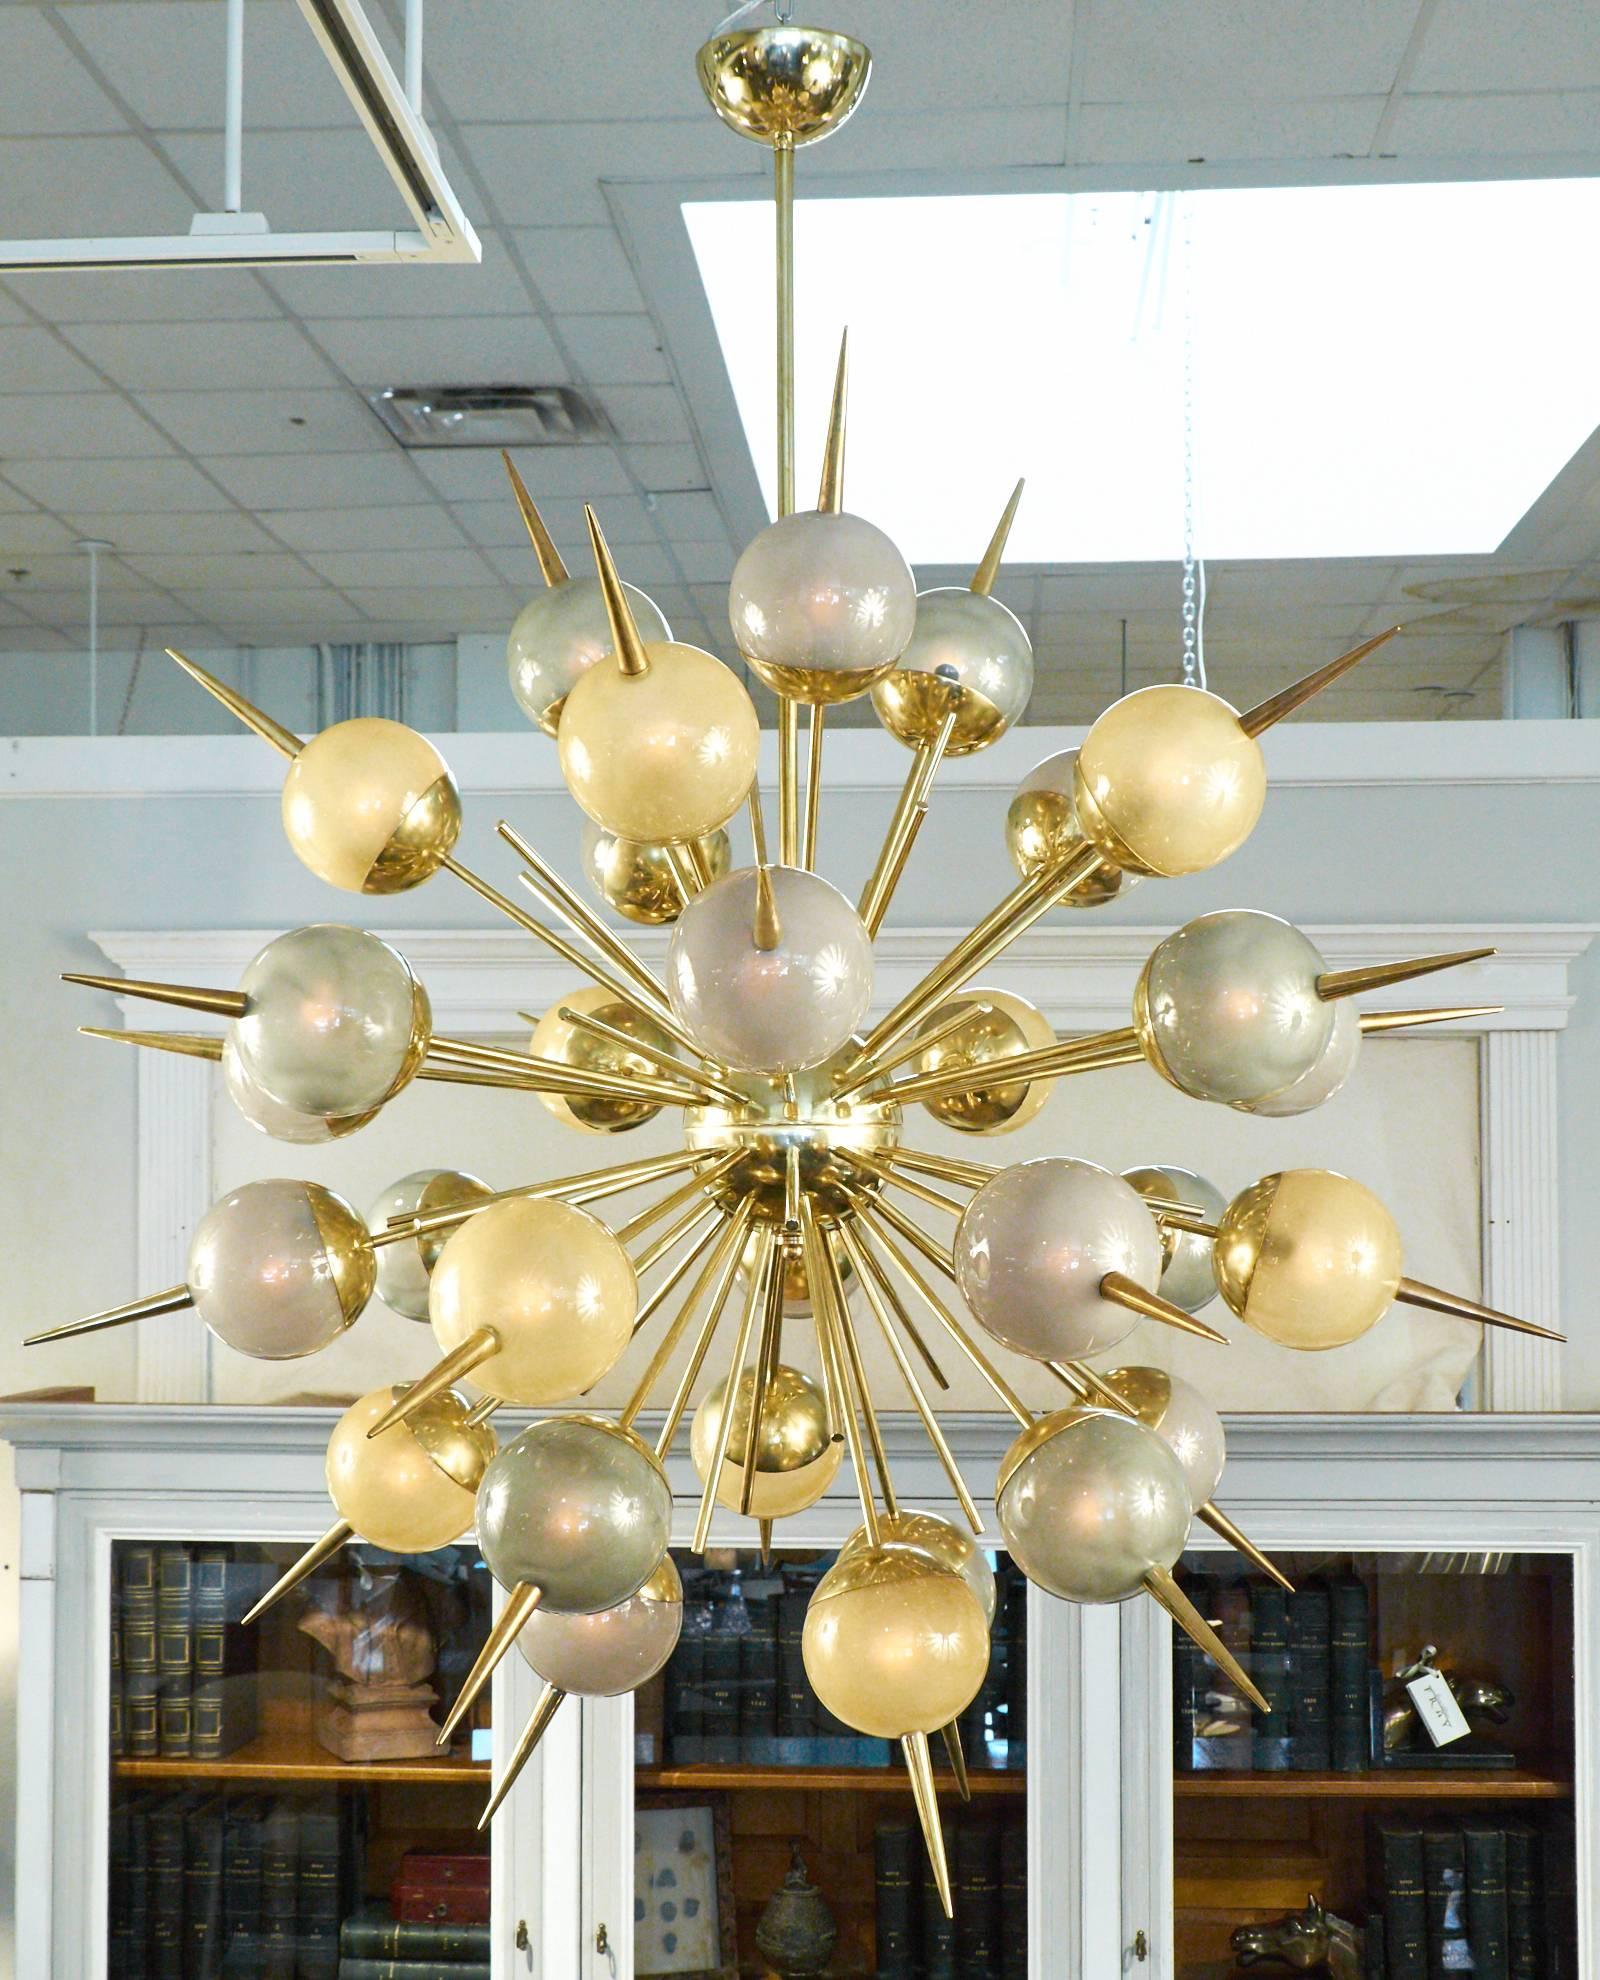 Striking Murano glass and brass Sputnik style chandelier with an array of 30 globes in gold, green and purple Murano glass on solid brass rods. Each globe is lit from within by one candelabra base bulb. Rewired for the US.

This fixture is currently